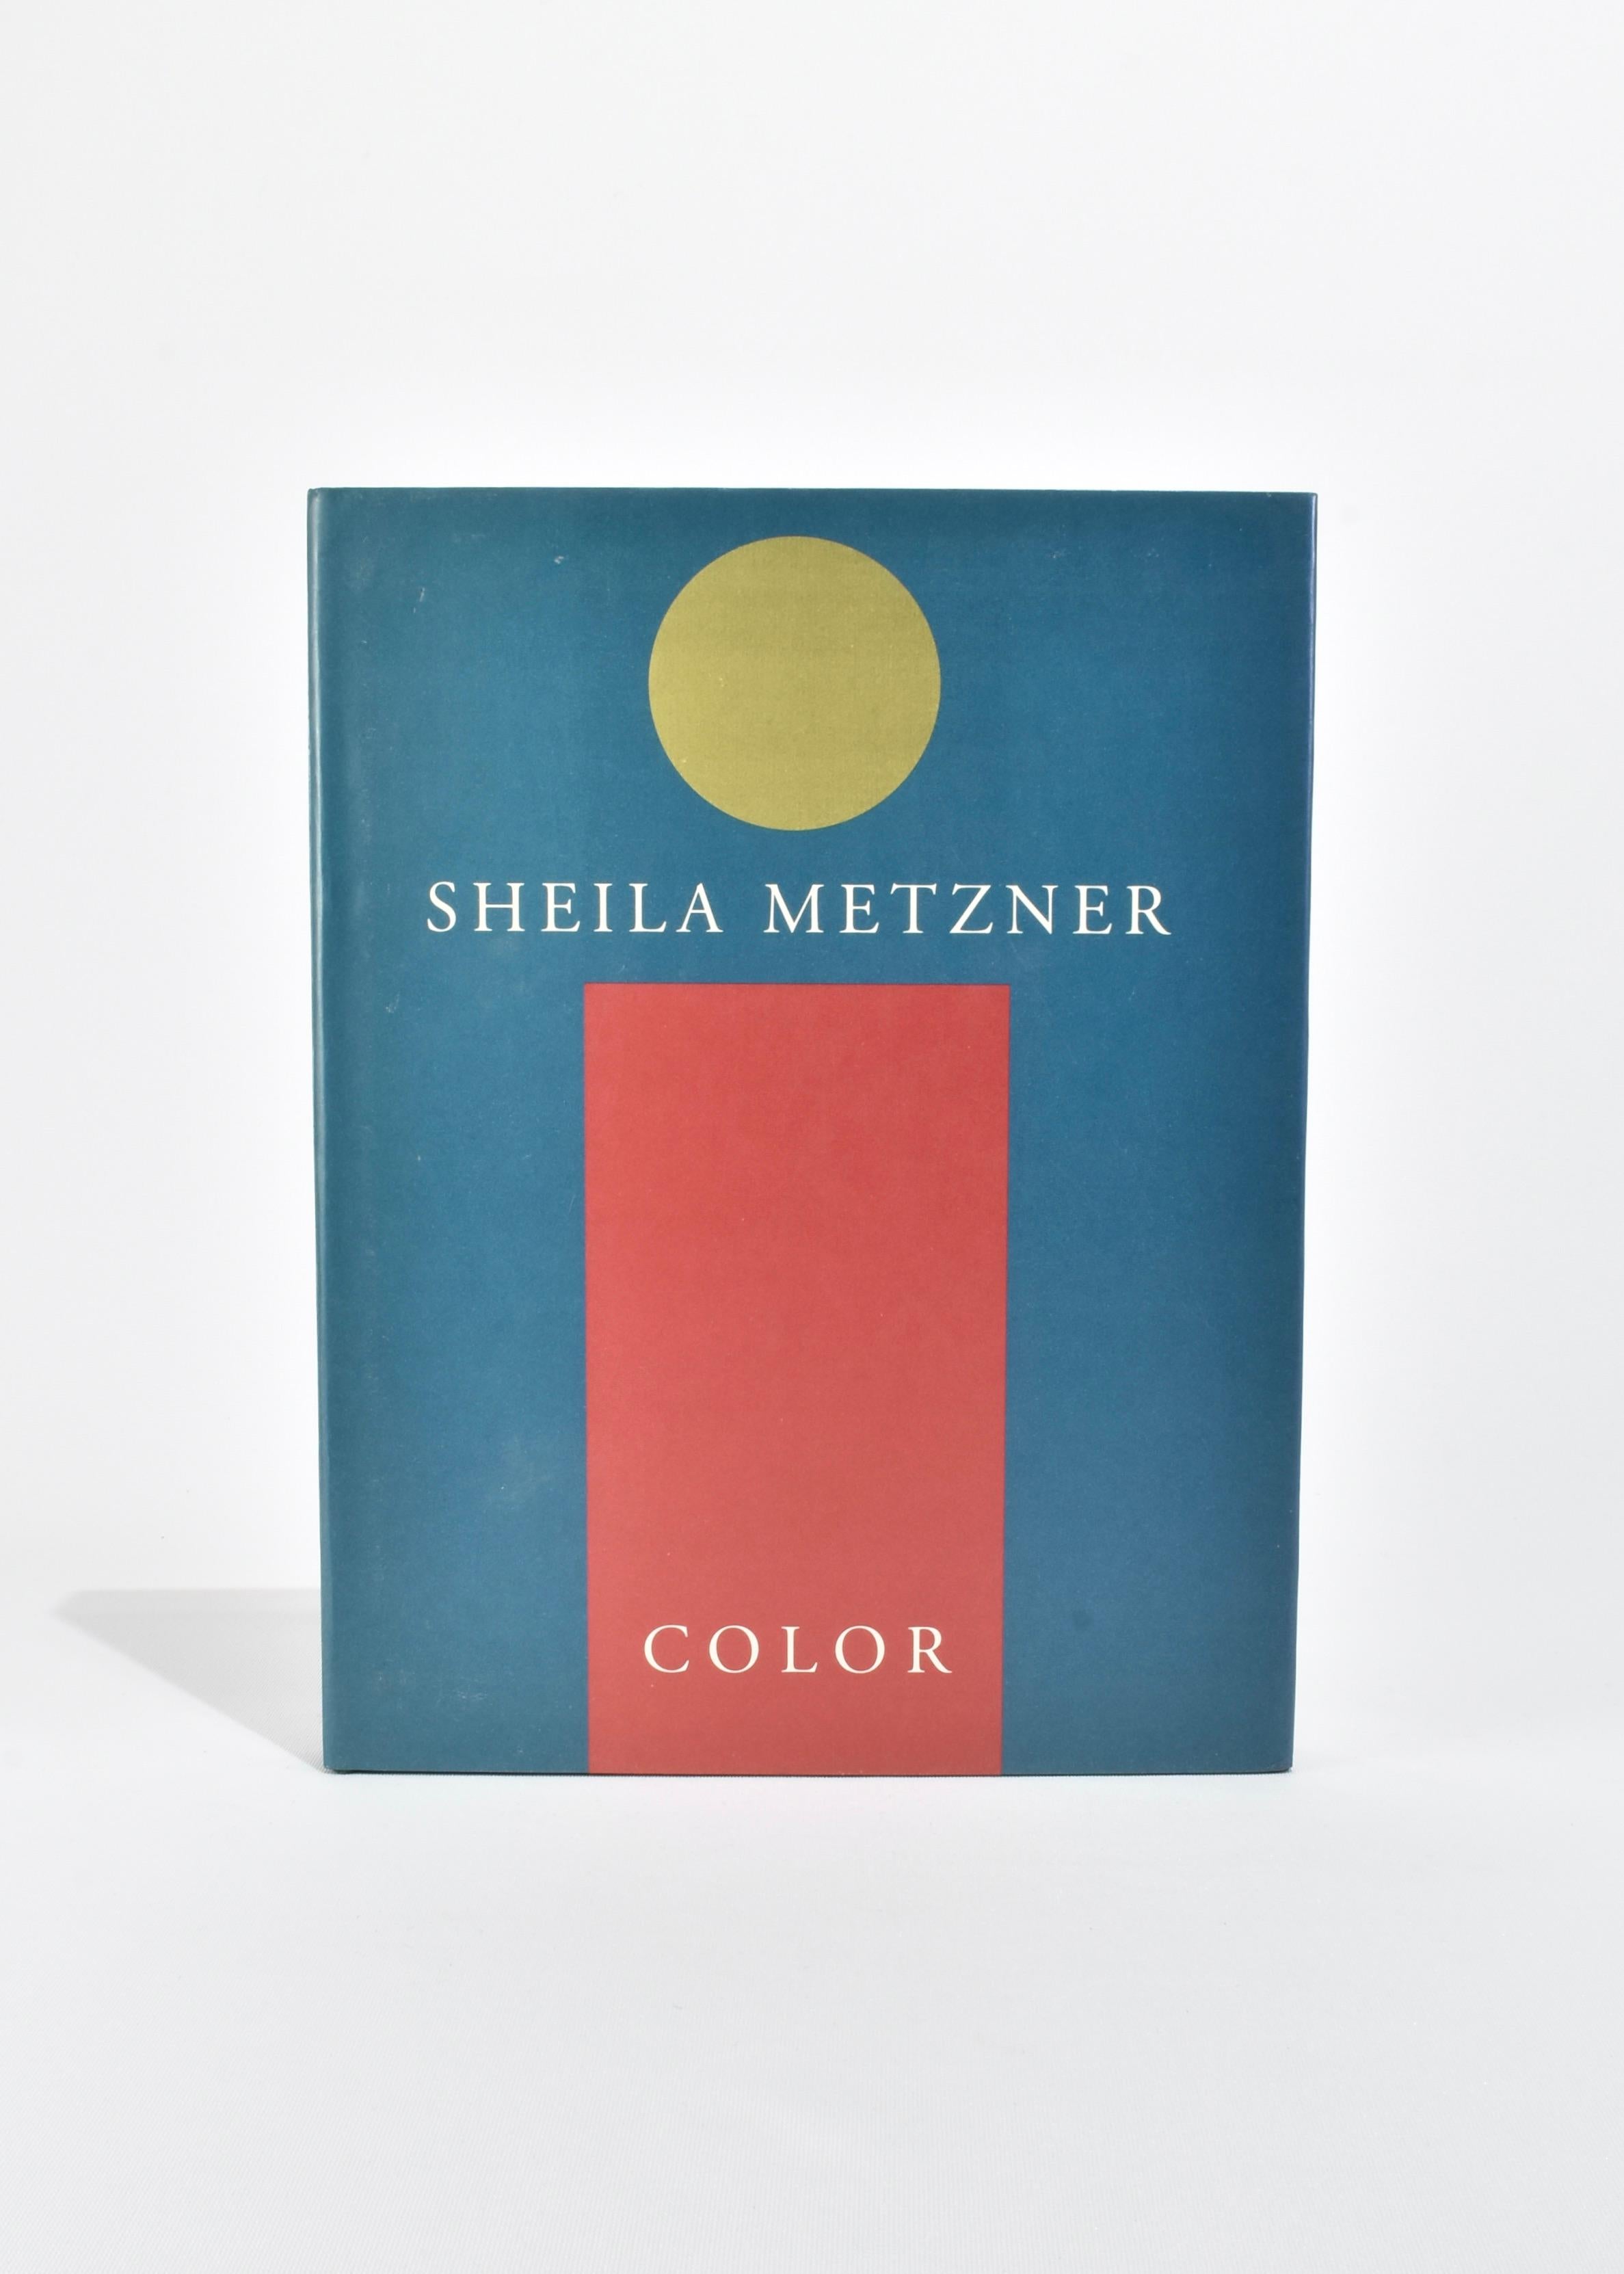 Hardback coffee table book featuring the work of photographer, Sheila Metzner. By Sheila Metzner, published in 1991. First edition.

